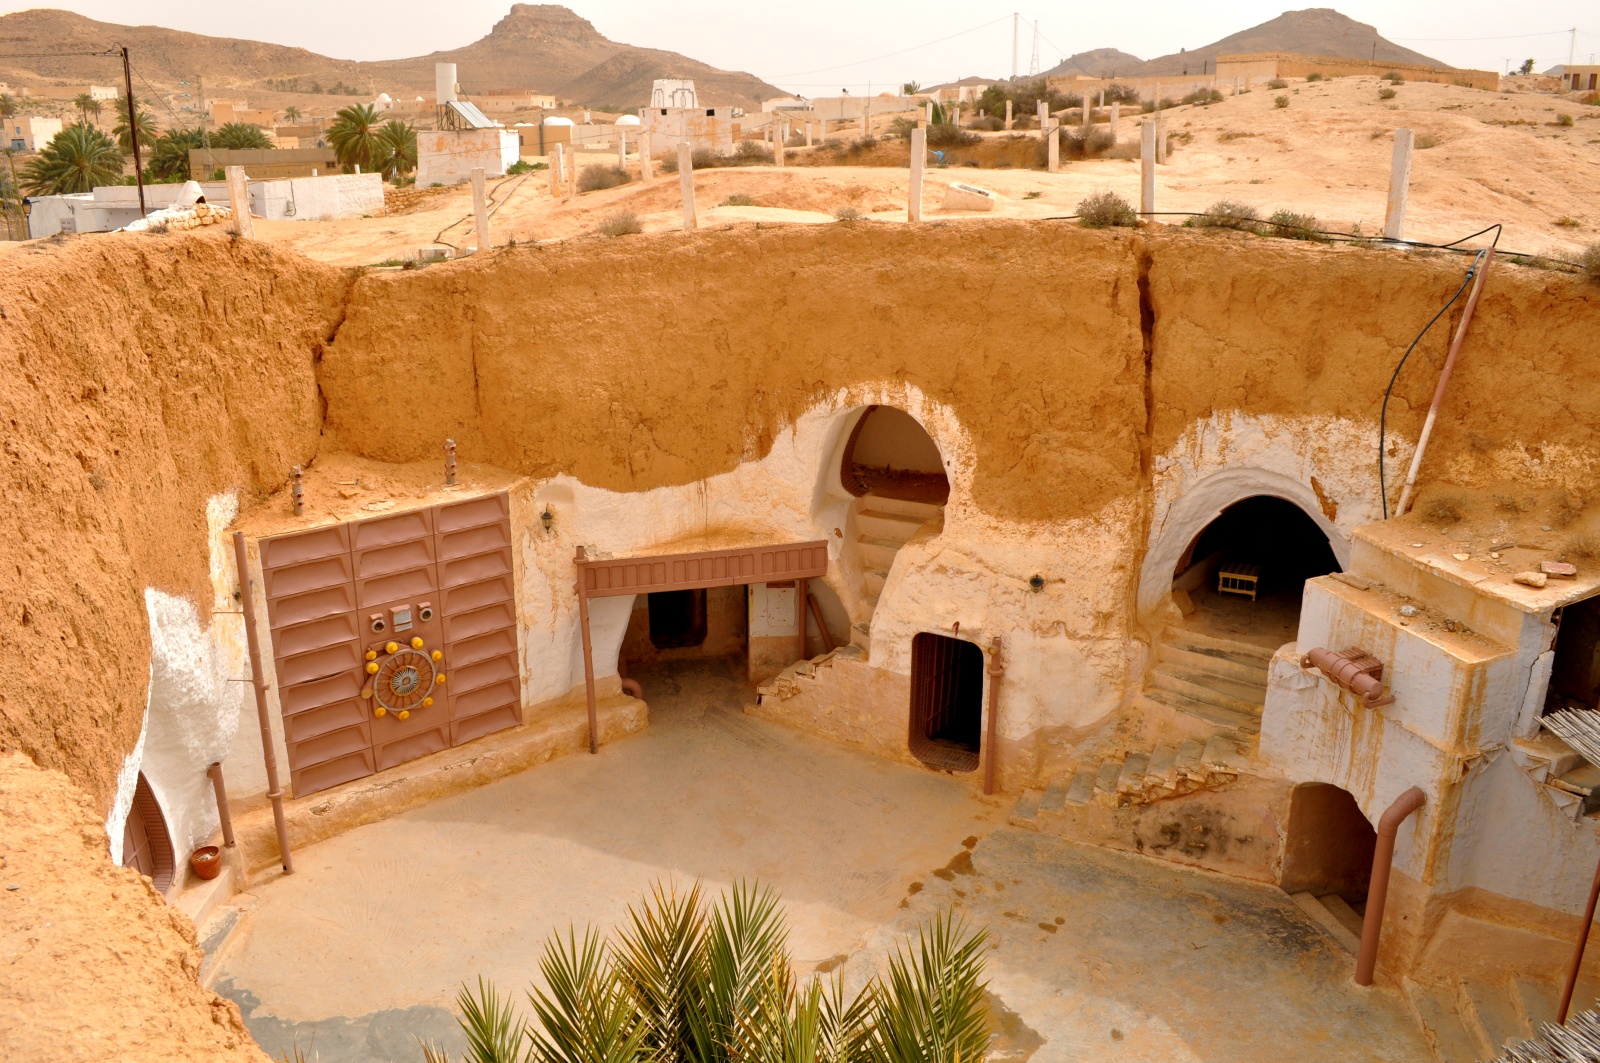 Hotel Sidi Driss in Matmata, used in 1976 as a filming location for Star Wars Episode IV: A New Hope